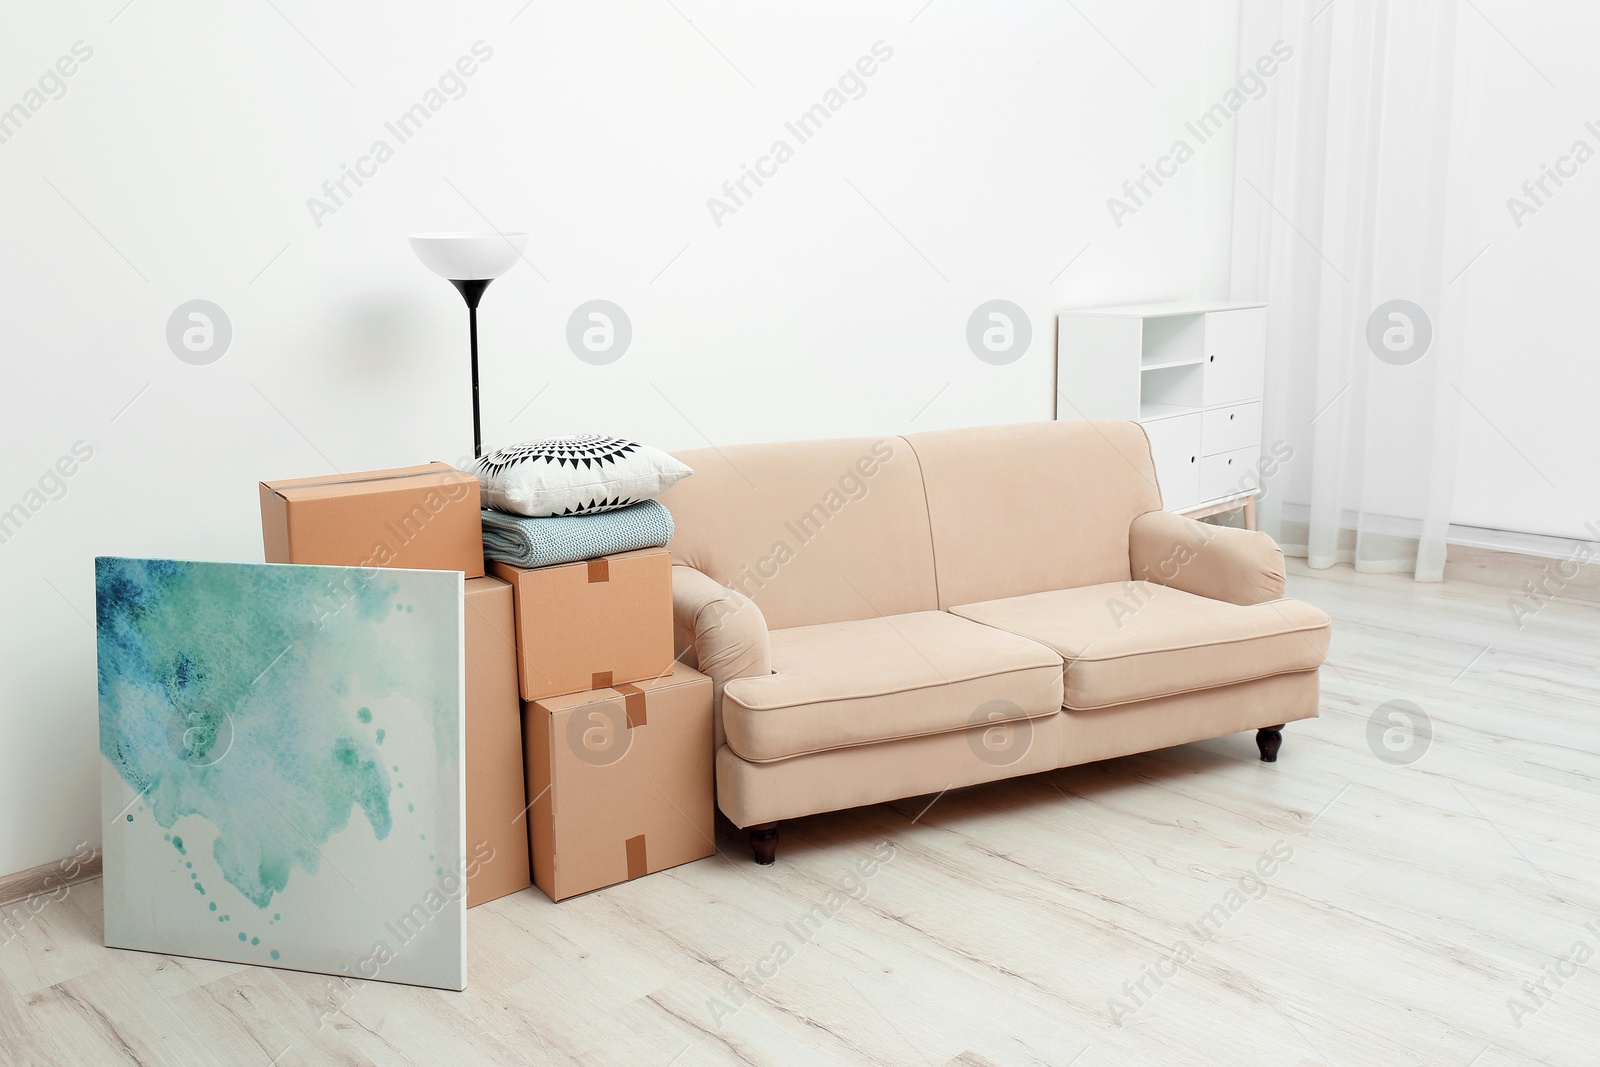 Photo of Moving boxes and household stuff in living room